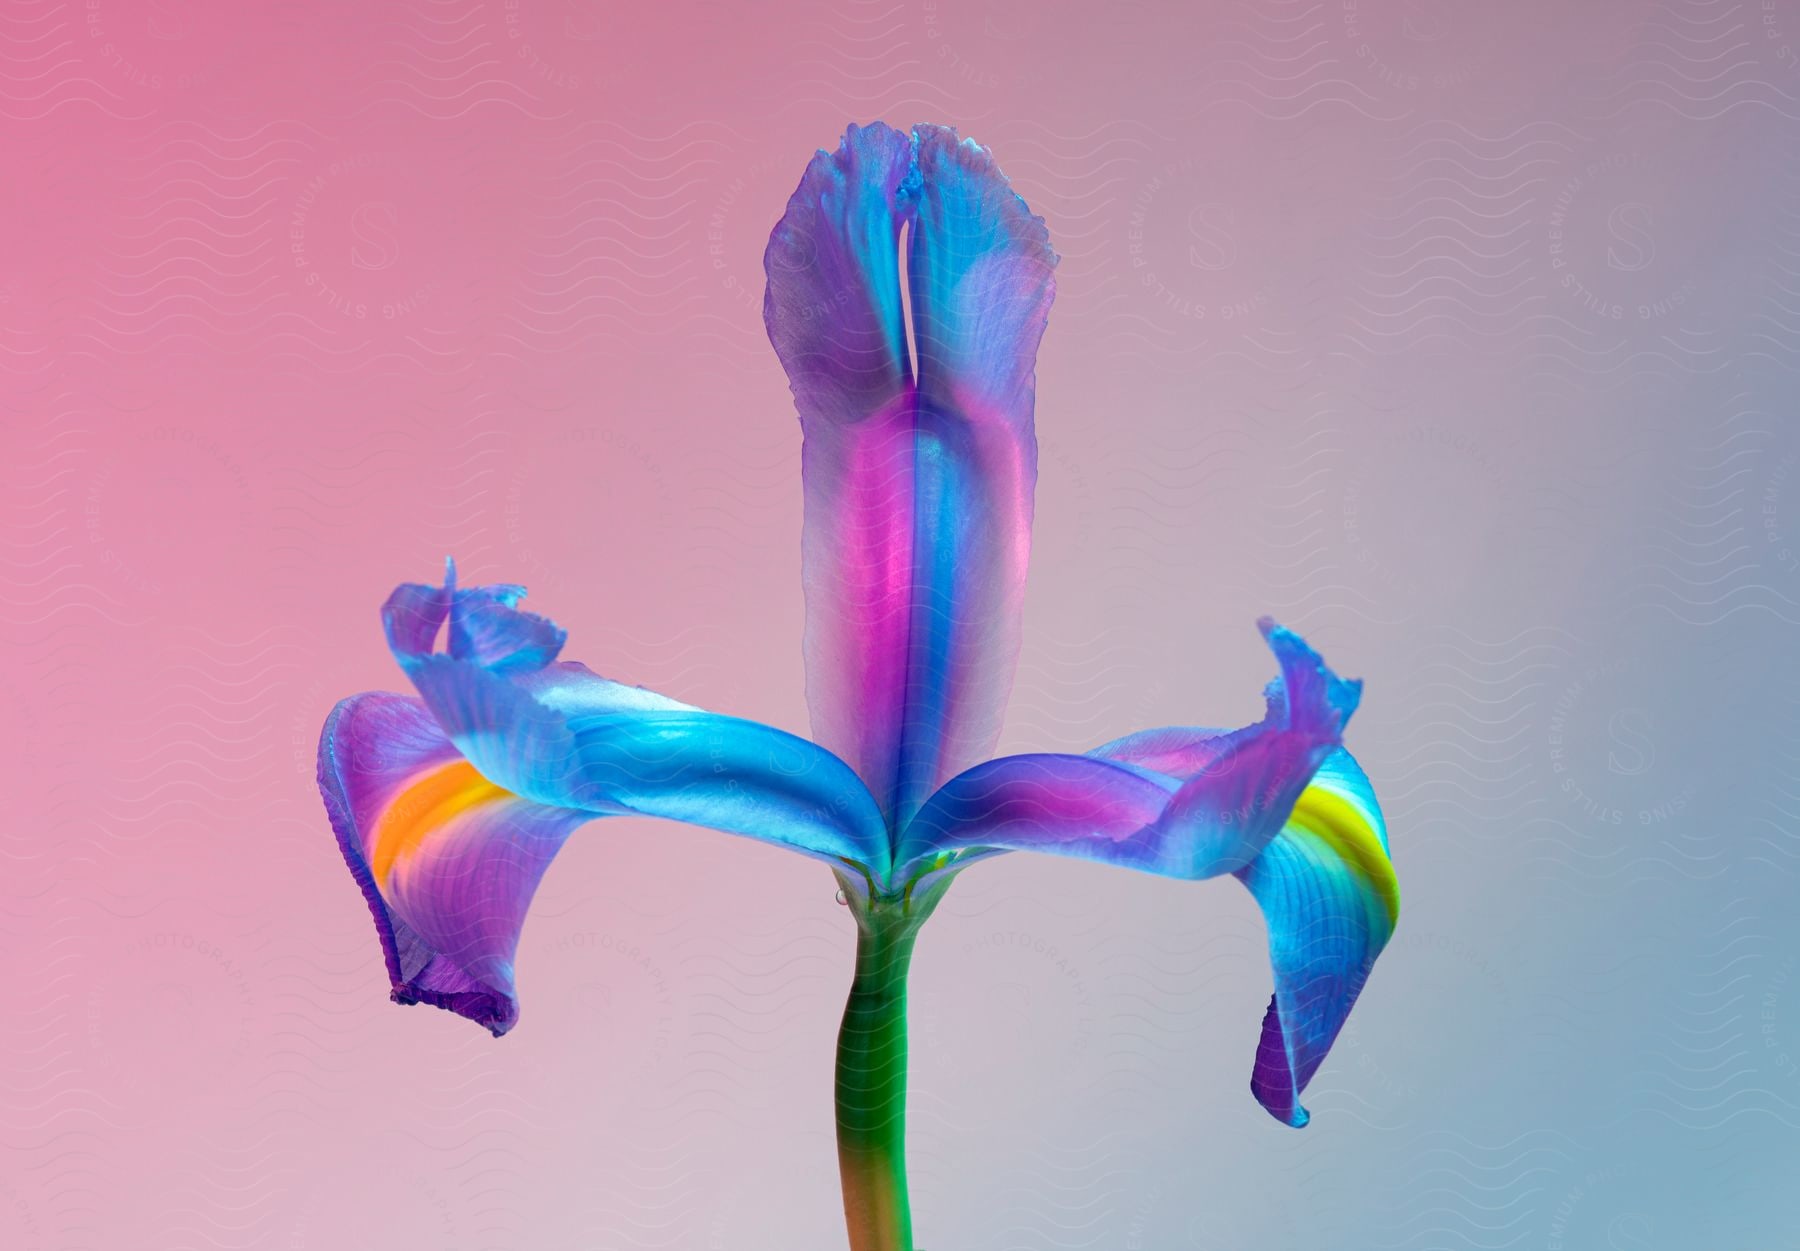 A plant with three petals colored with blue and violet colors.